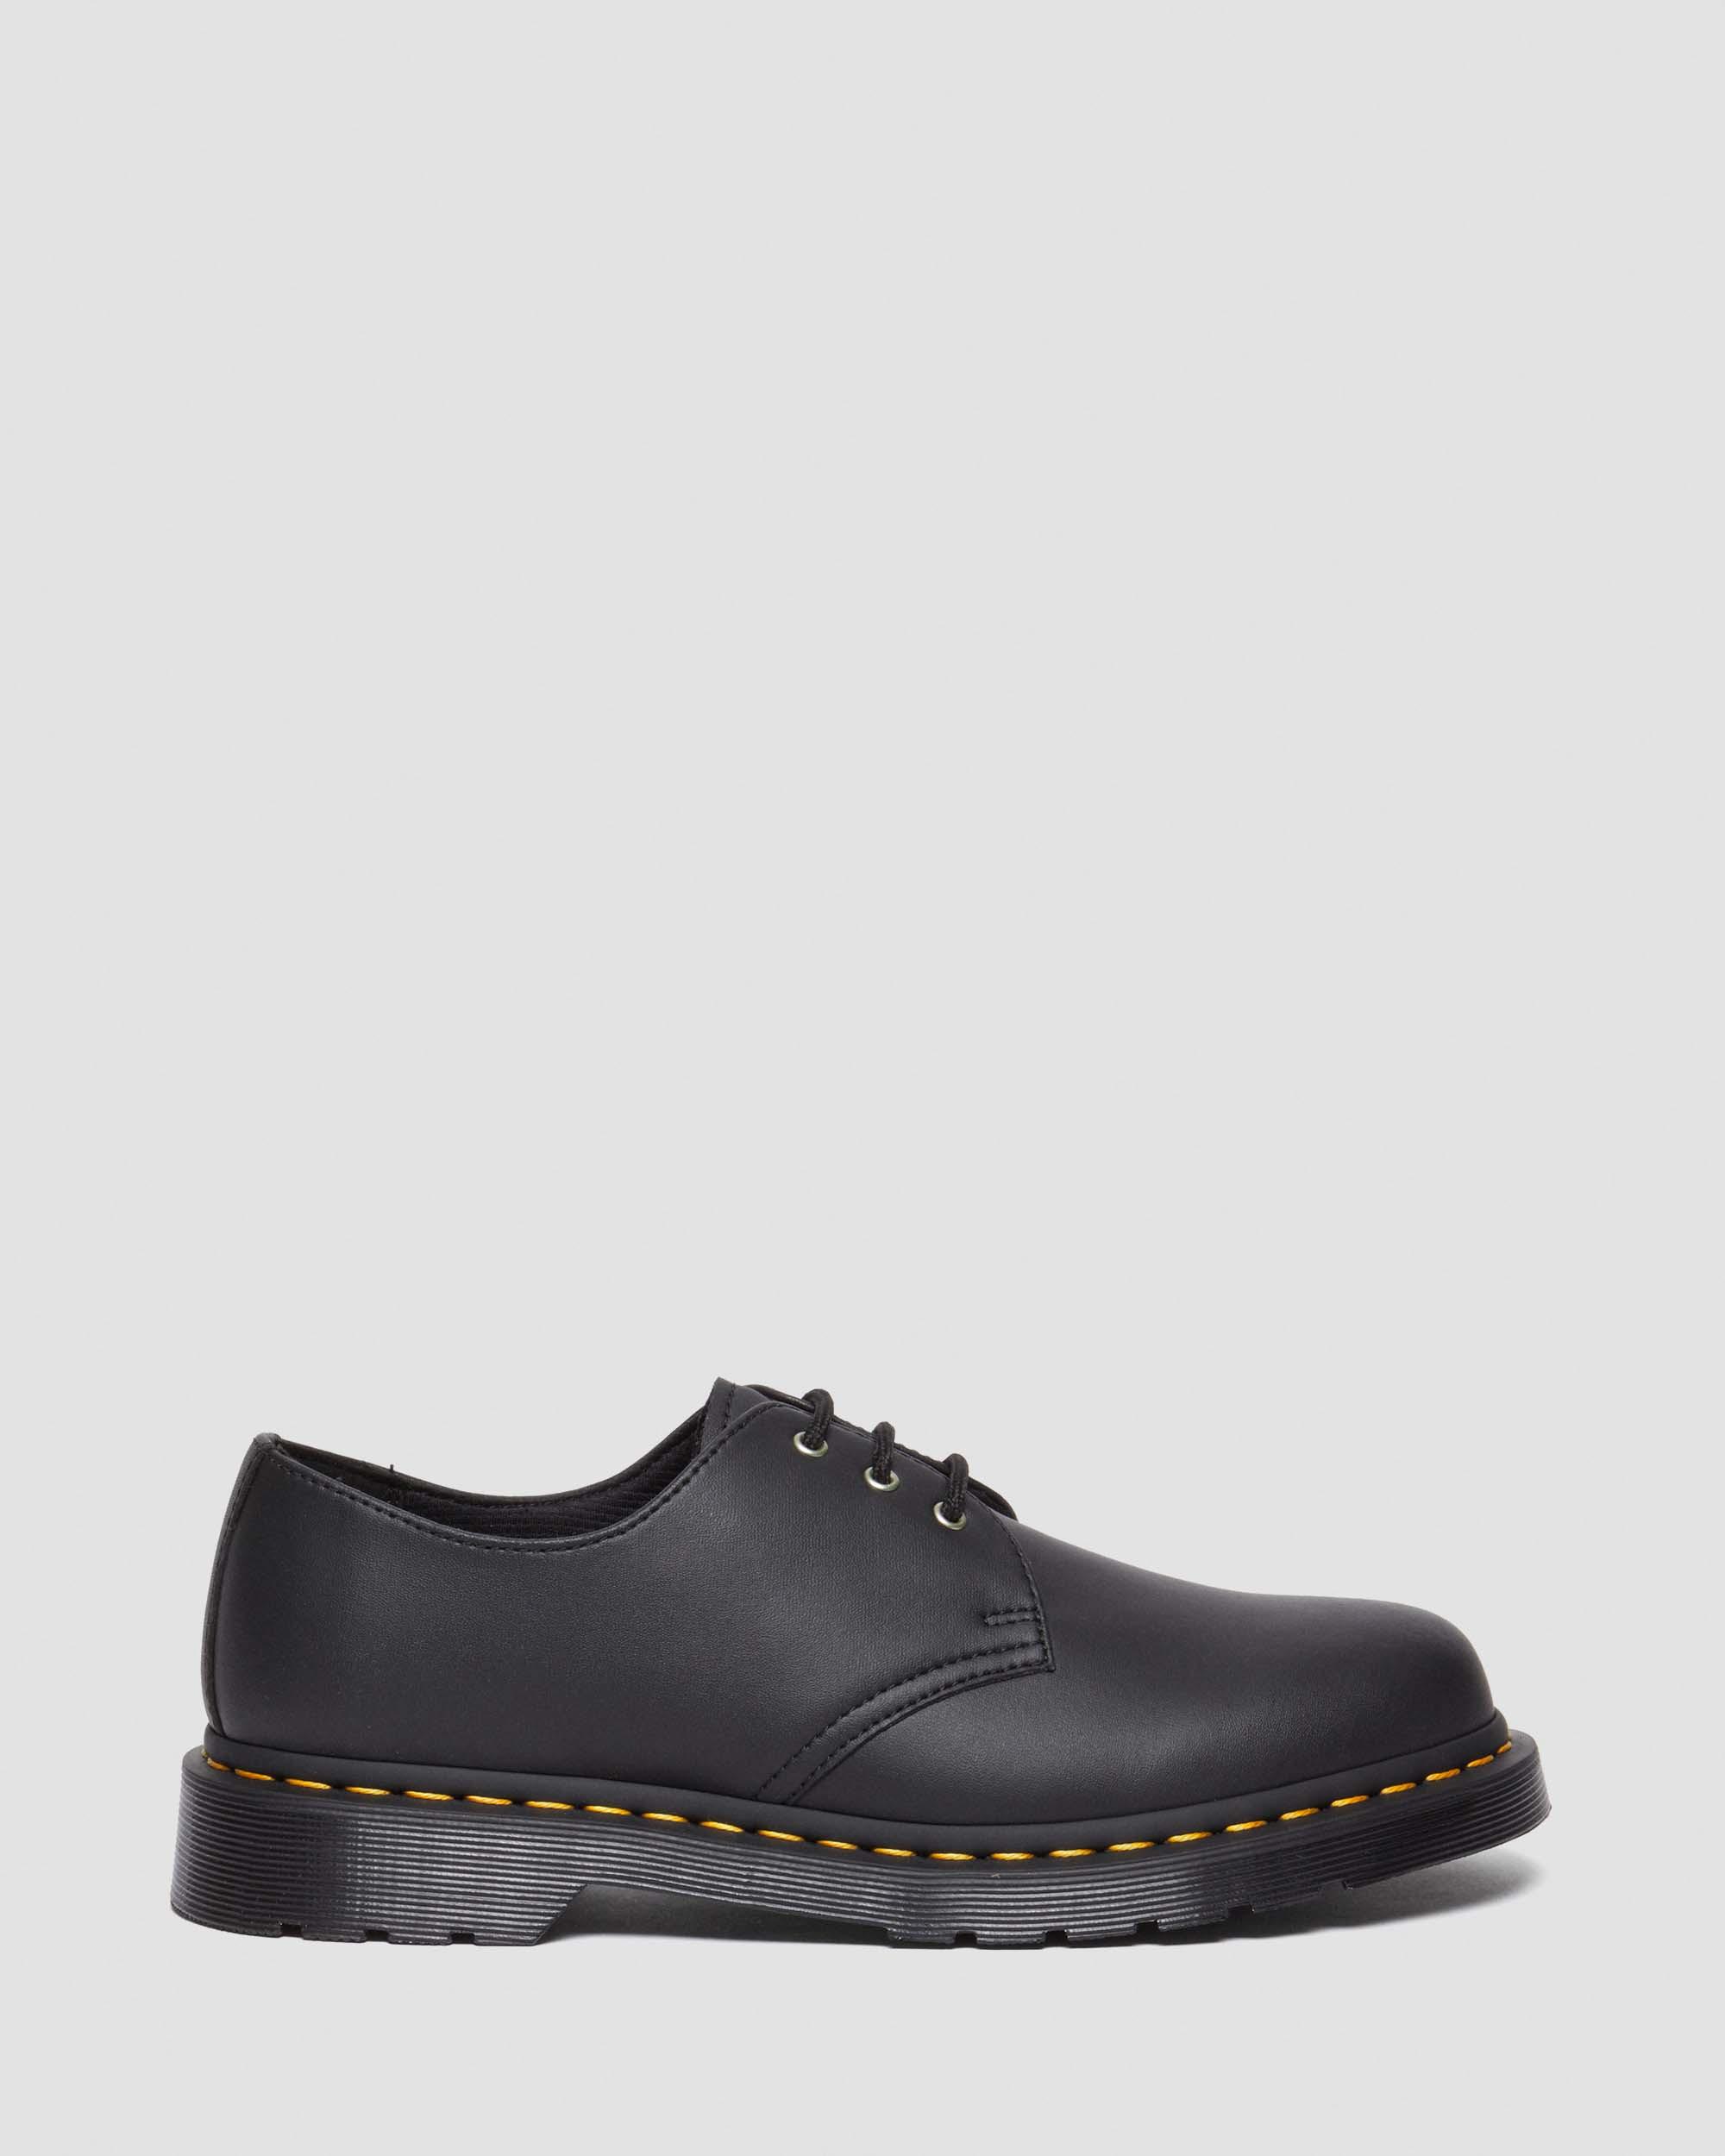 1461 Reclaimed Leather Oxford Shoes1461 Reclaimed Leather Oxford Shoes Dr. Martens